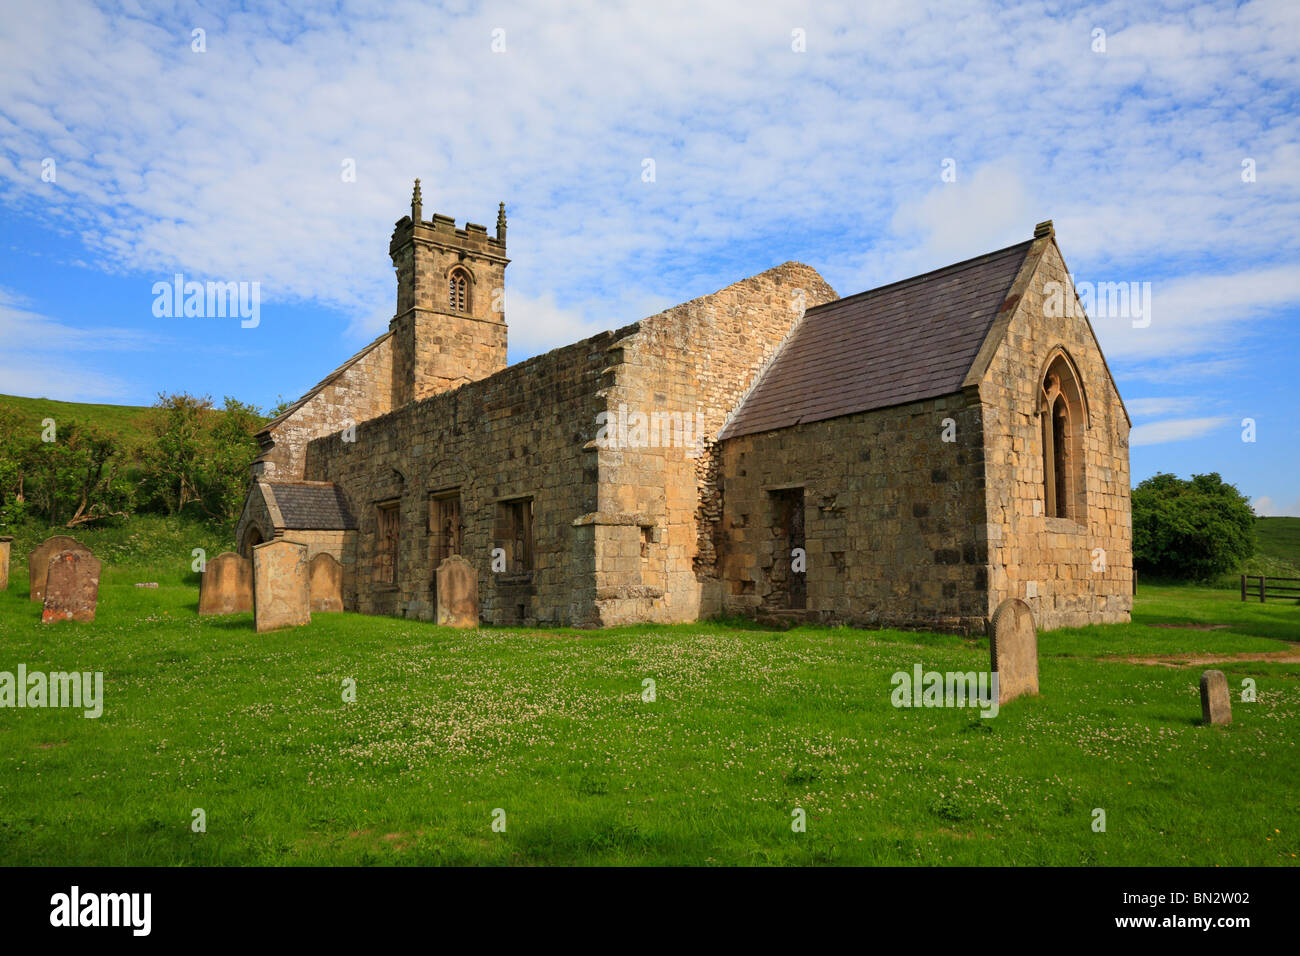 The ruins of St Martin's Church Wharram Percy, deserted medieval village on the Yorkshire Wolds Way, North Yorkshire, England, UK. Stock Photo